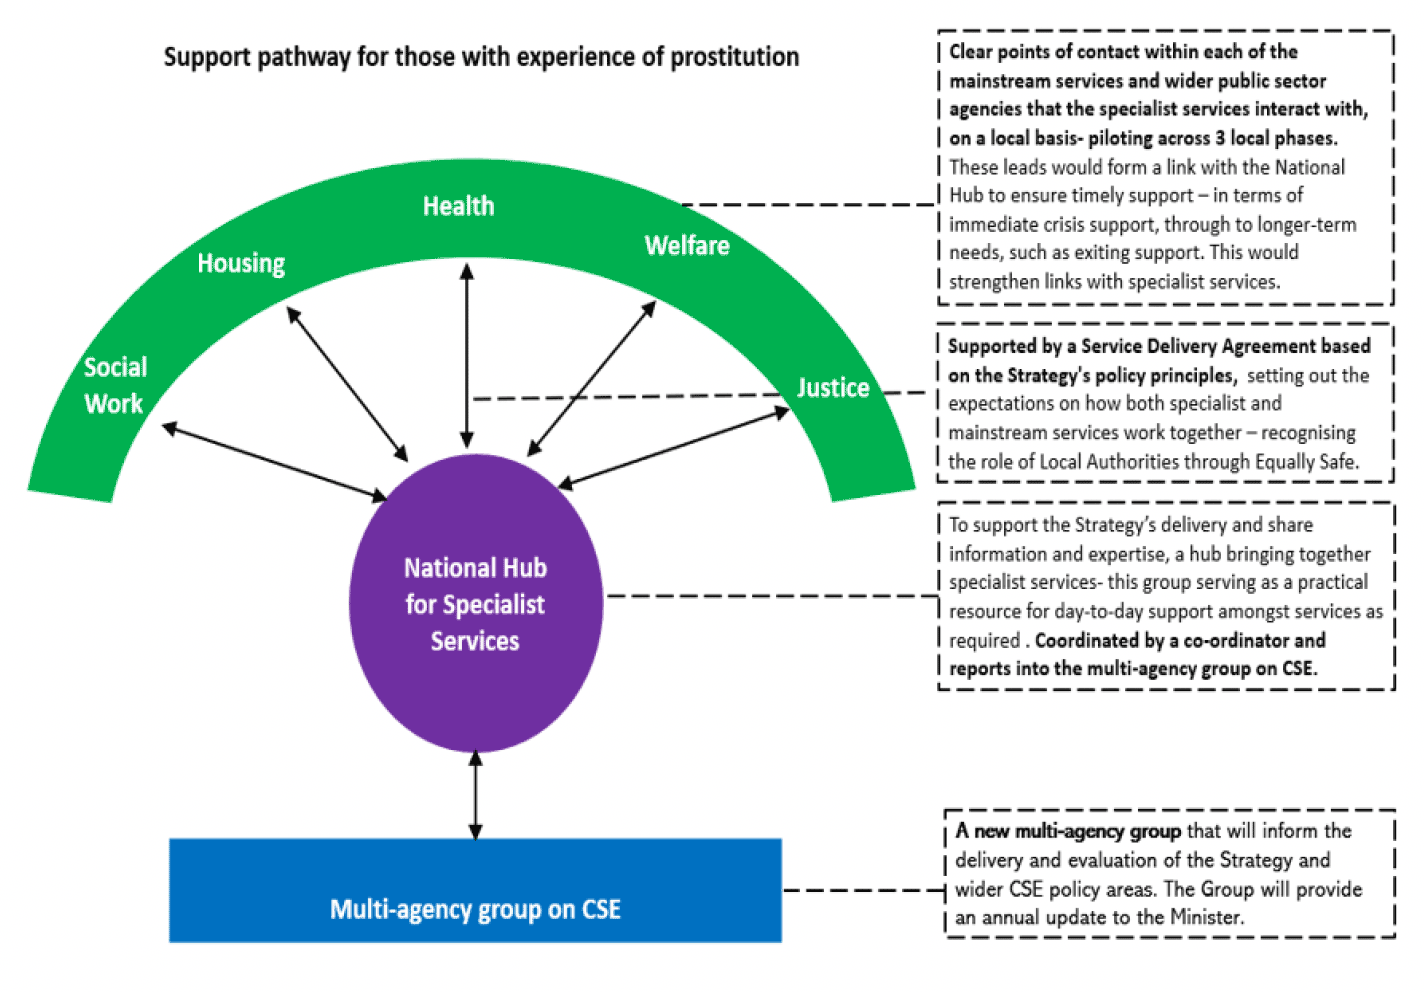 Outline of the future support pathway for those with experience of prostitution